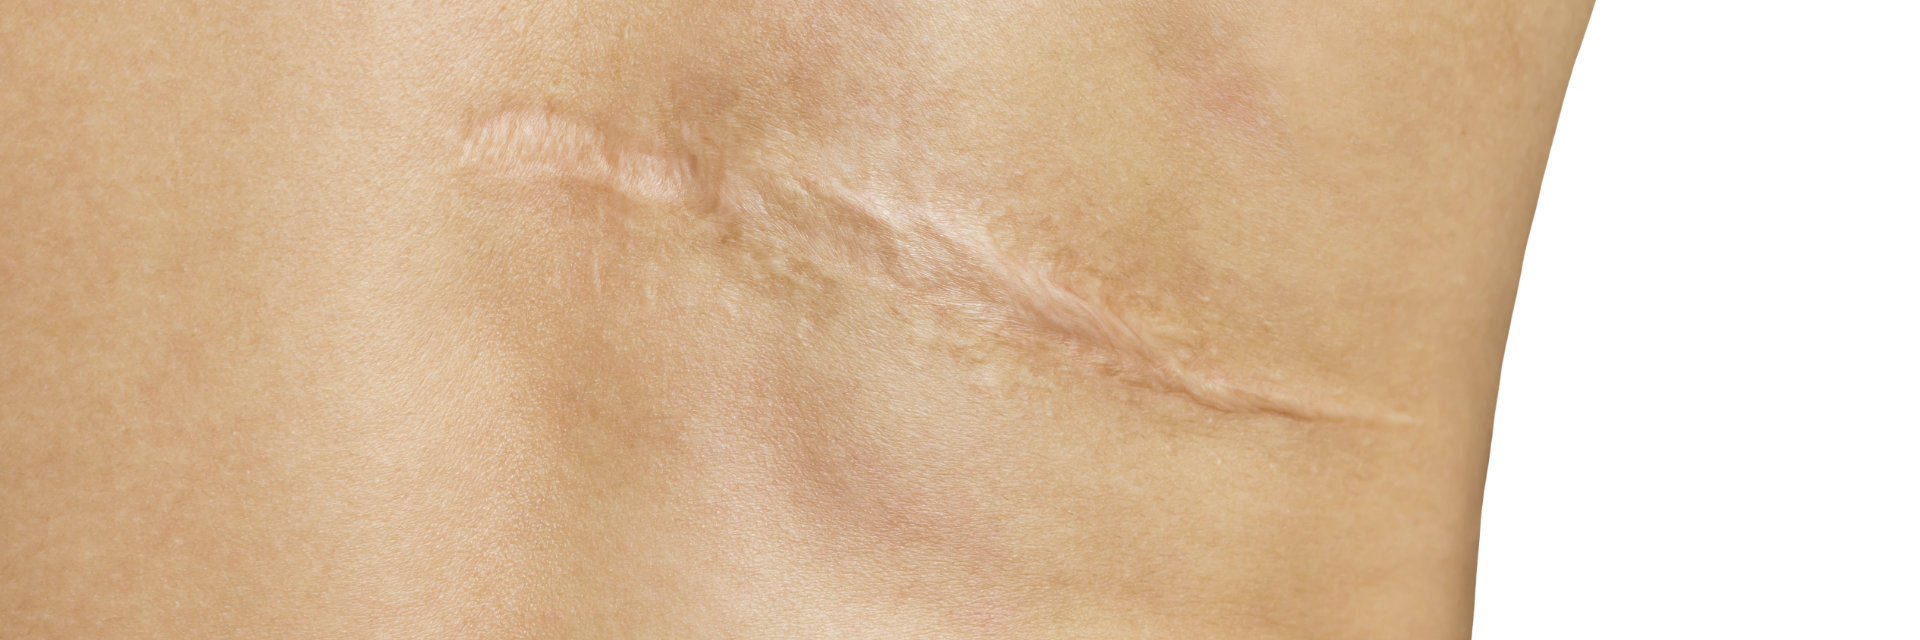 Hypertrophic Scars Beverly Hills, CA